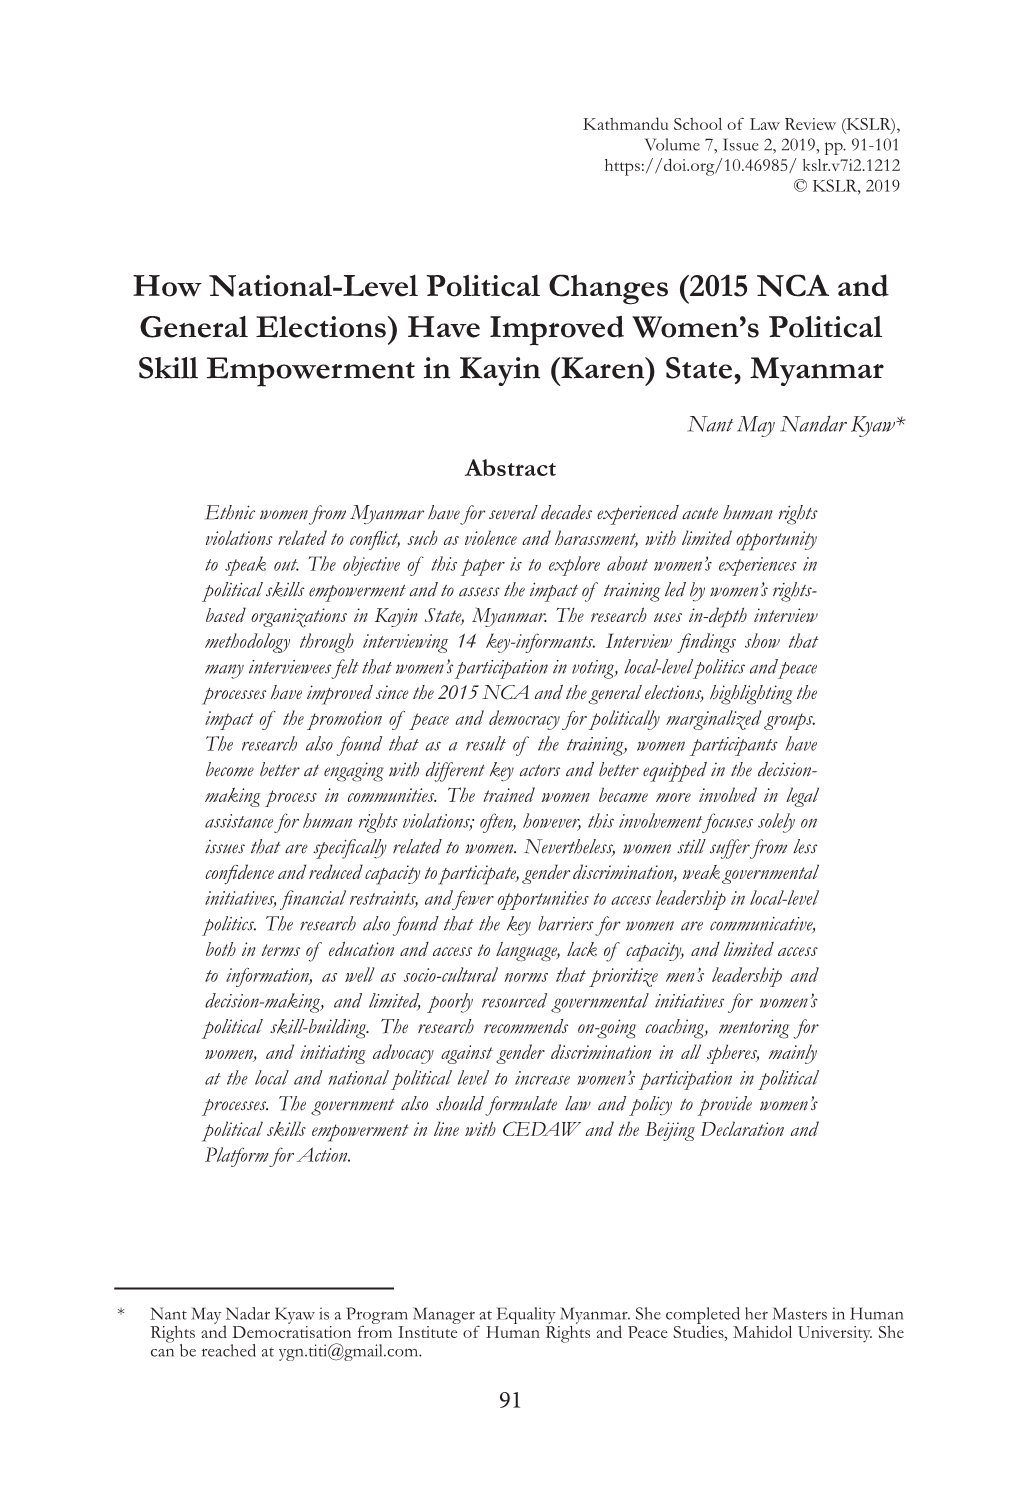 2015 NCA and General Elections) Have Improved Women’S Political Skill Empowerment in Kayin (Karen) State, Myanmar